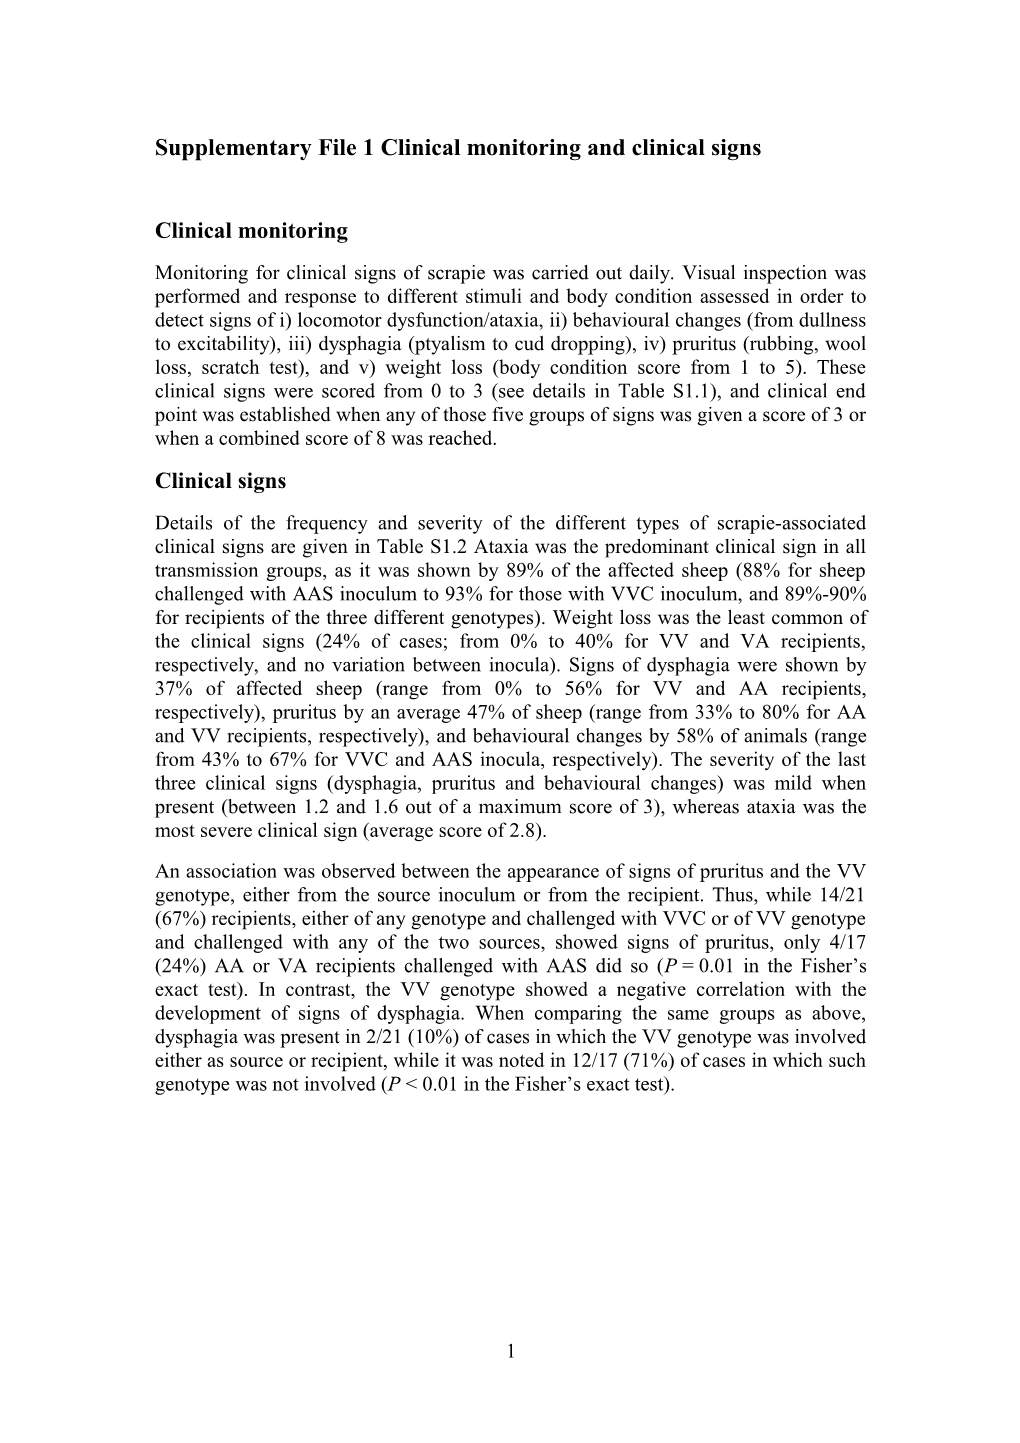 Supplementary File 1 Clinical Monitoring and Clinical Signs